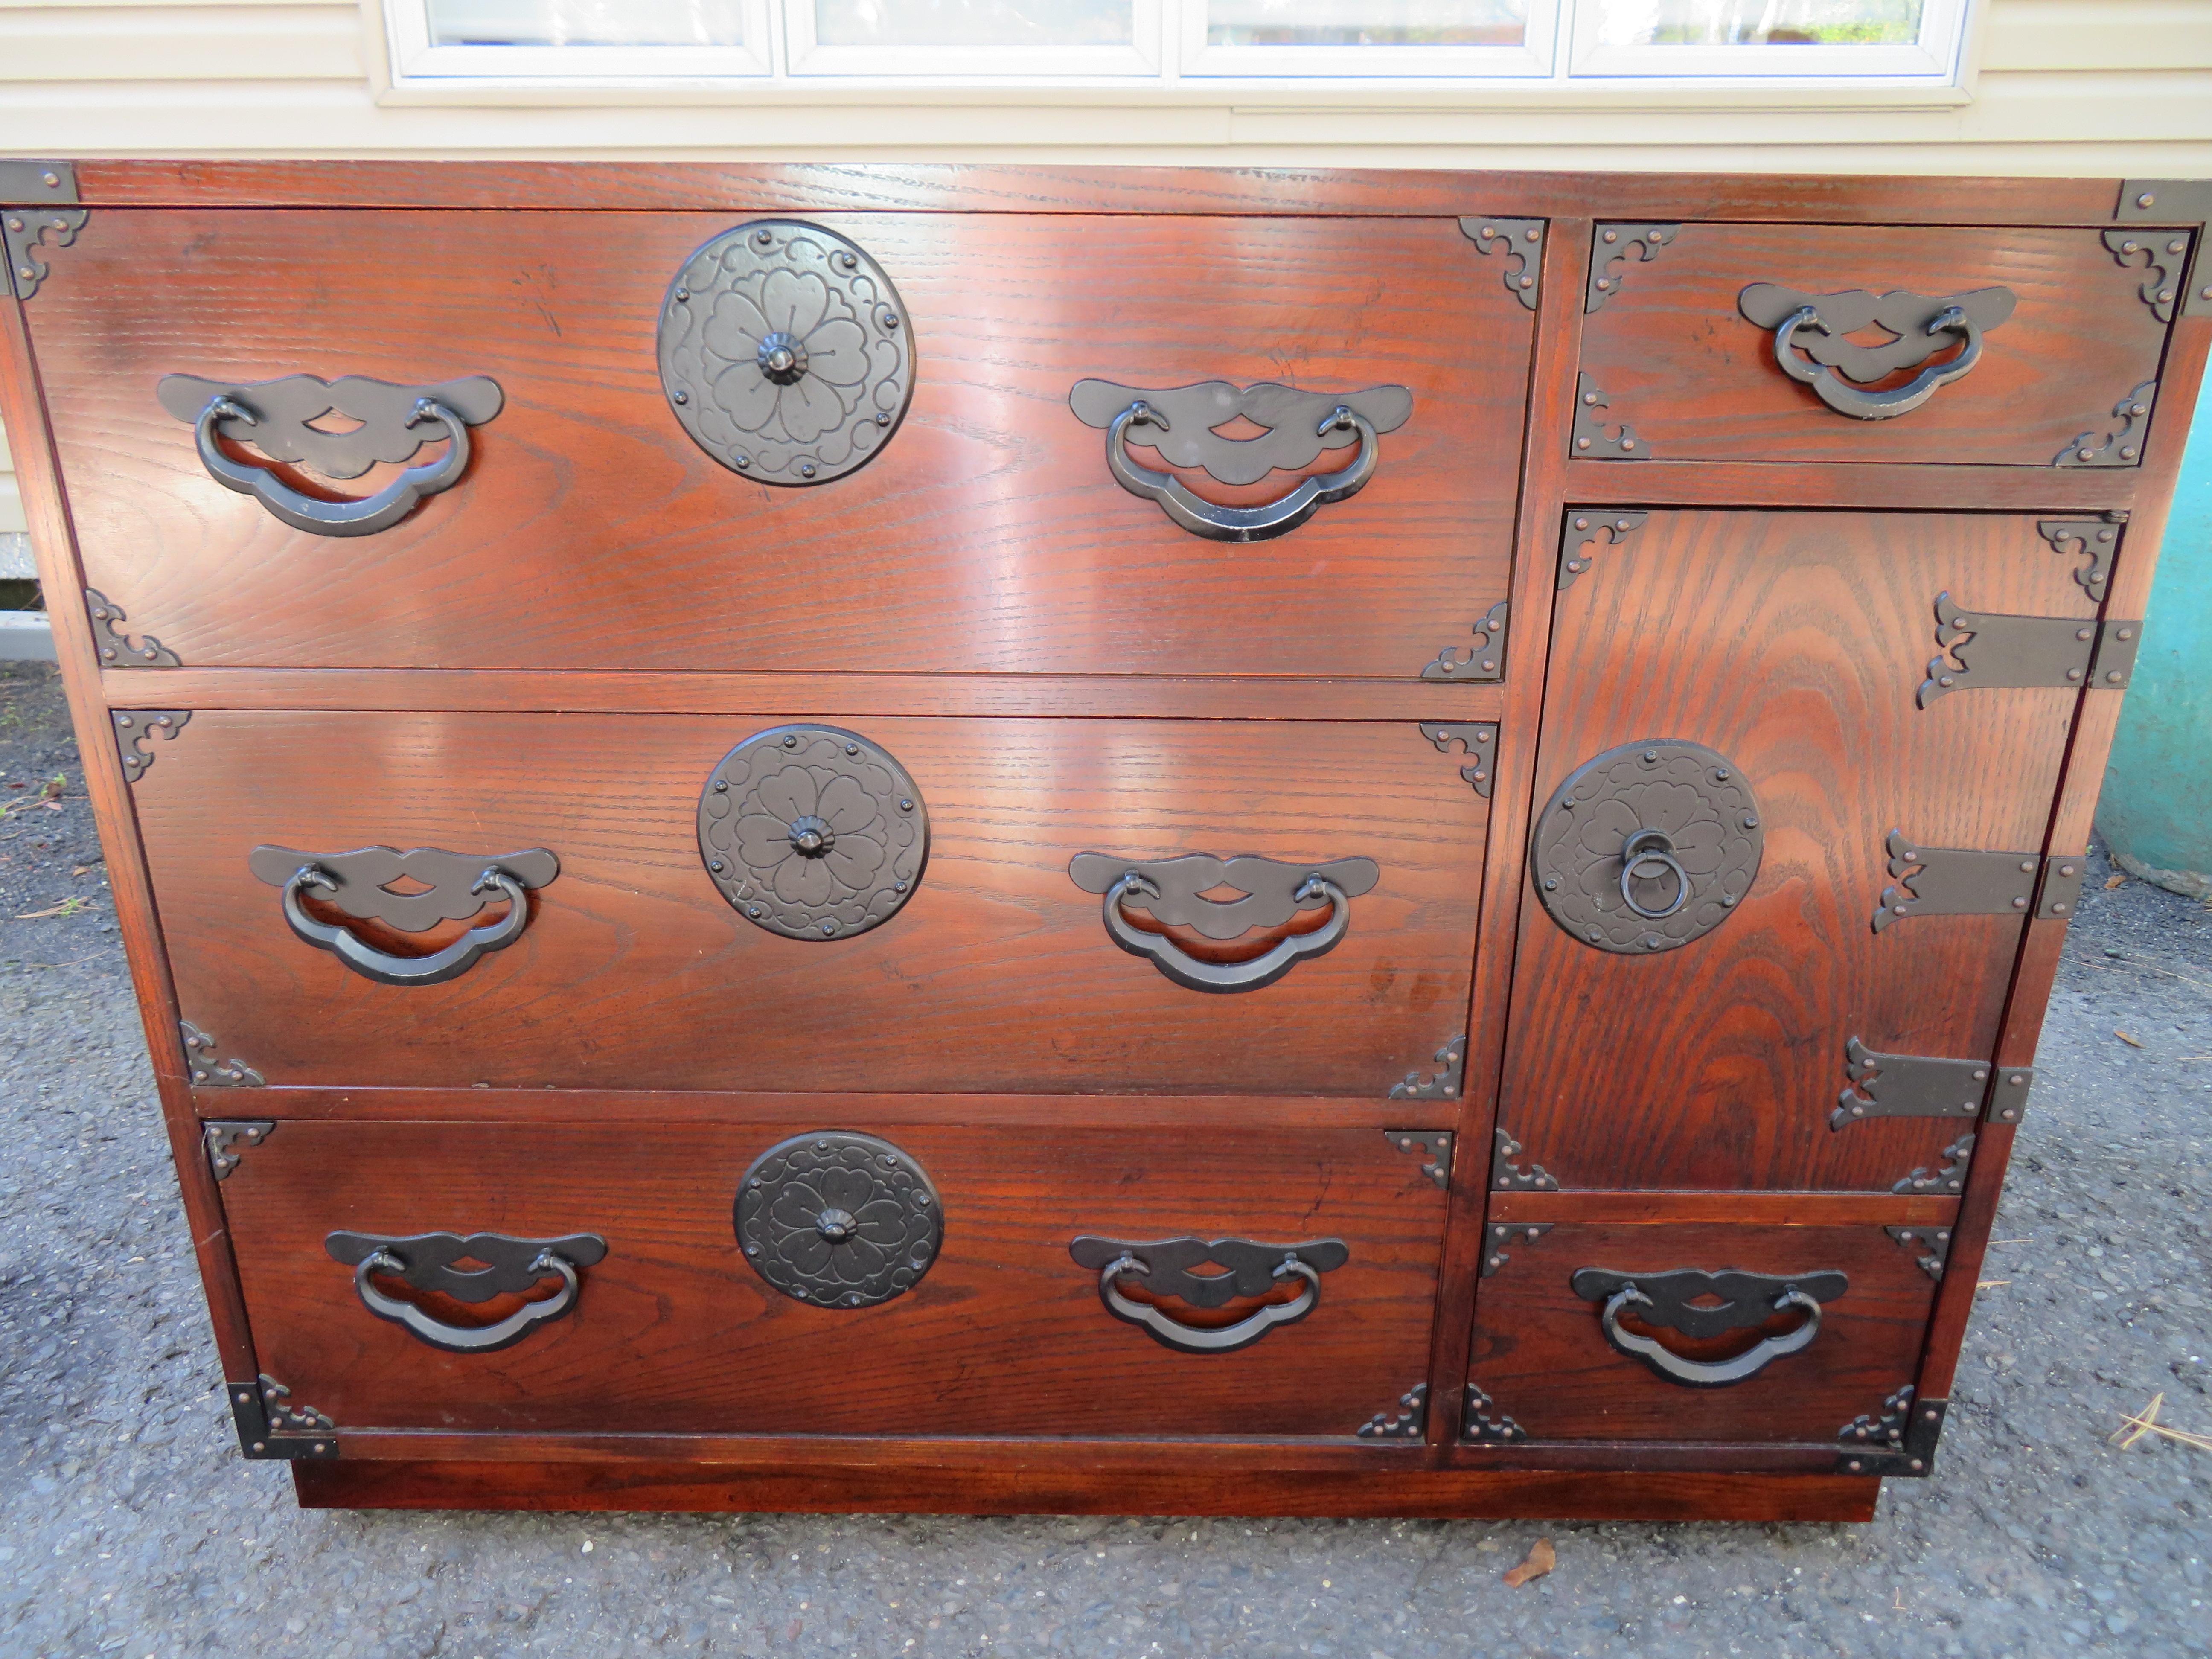 Amazingly beautiful Japanese Tansu bachelors chest by Baker. Dark stained oak with fantastic Japanese inspired hardware. They have a time-worn patina with splendid charm. I love the vintage look of these- gives your interior real Mid-century